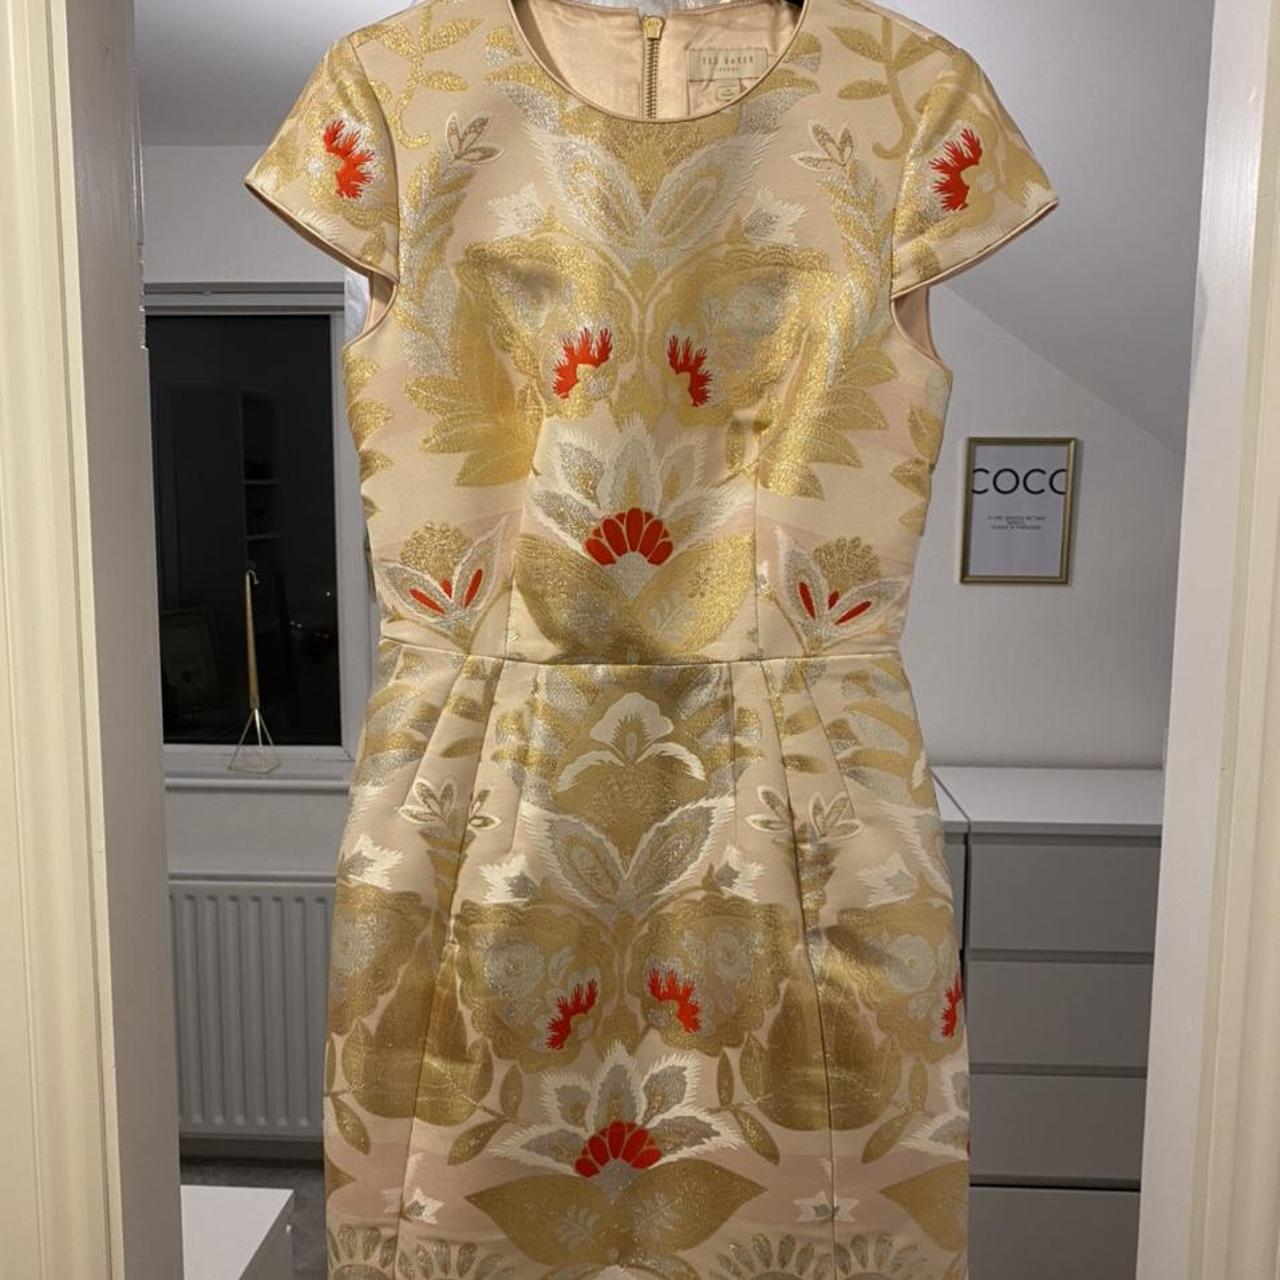 Ted Baker Jacquard Dress Size 1 (8/10) Immaculate... - Depop